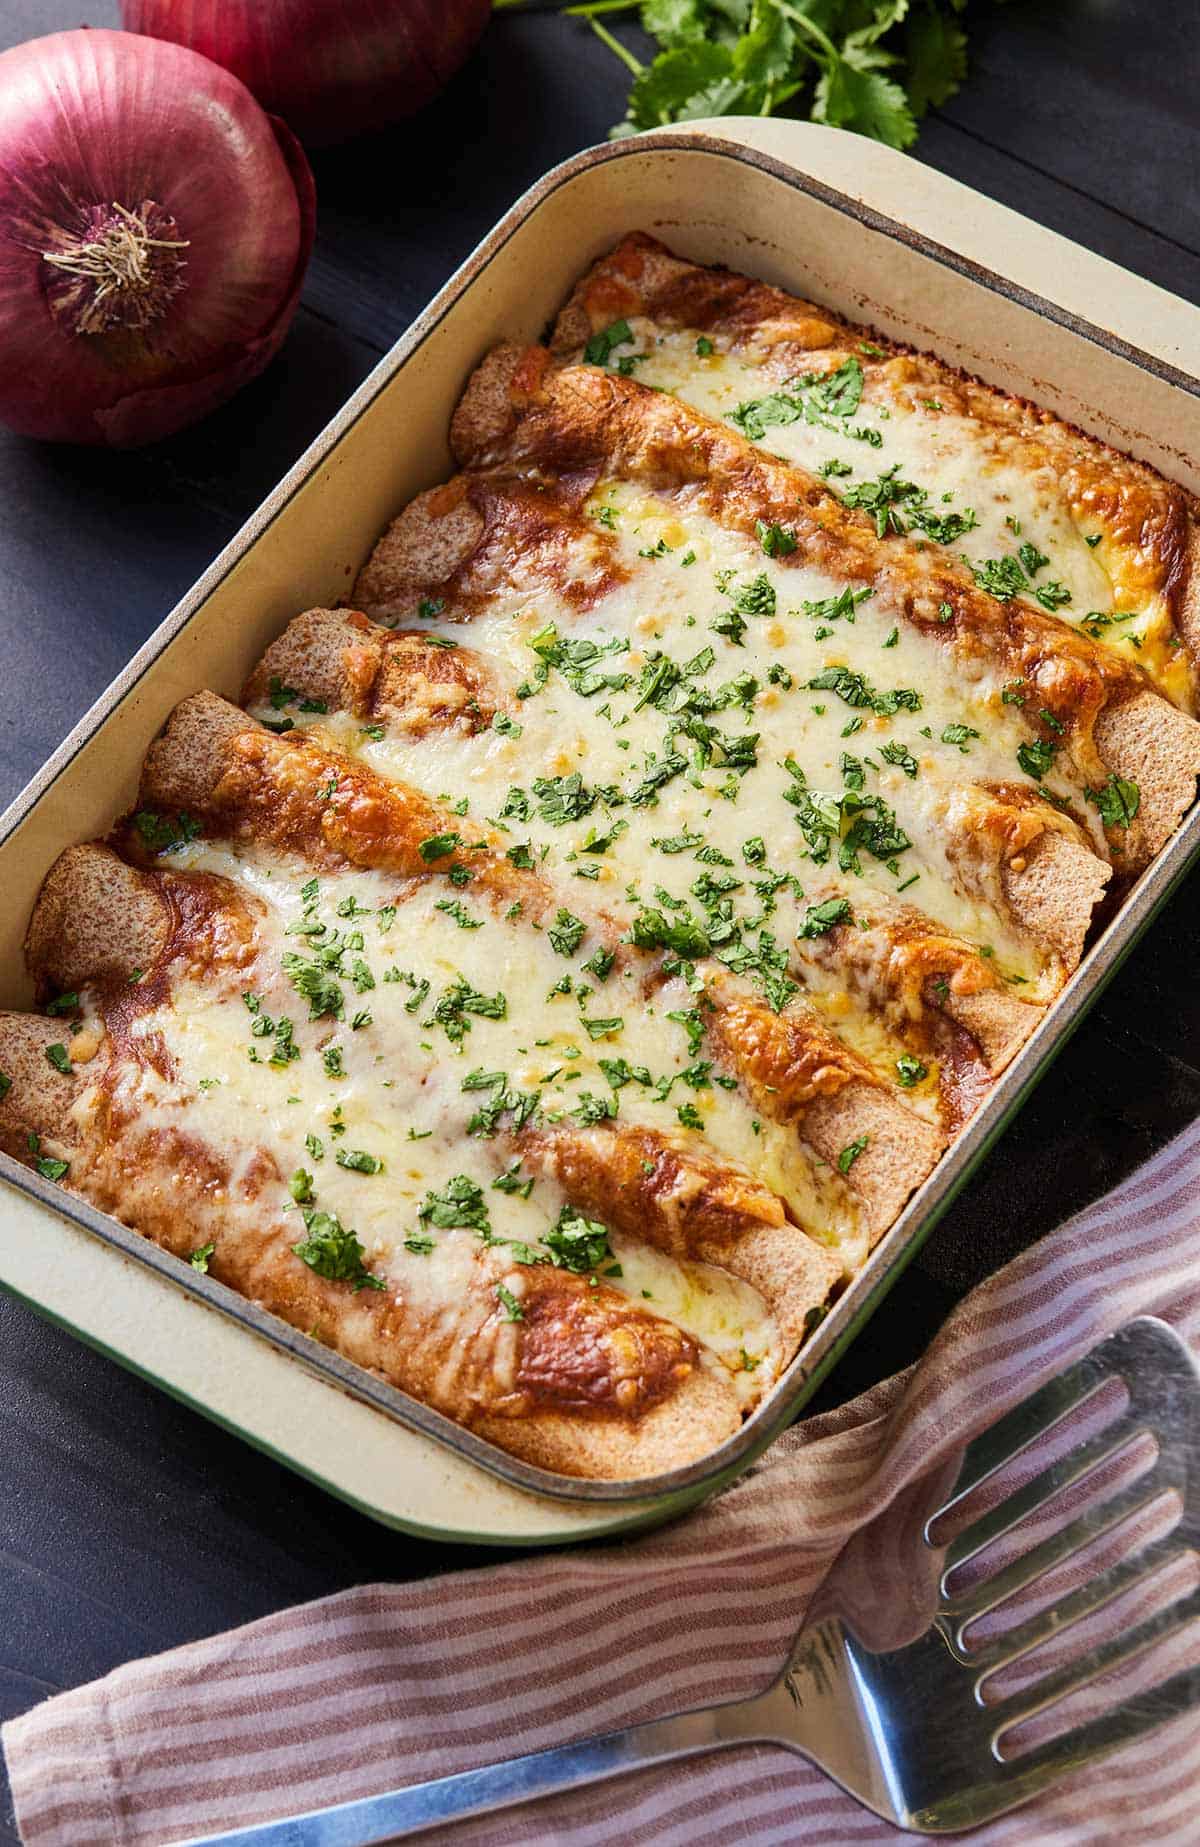 Overhead view of a casserole dish with a baked vegetarian enchiladas.